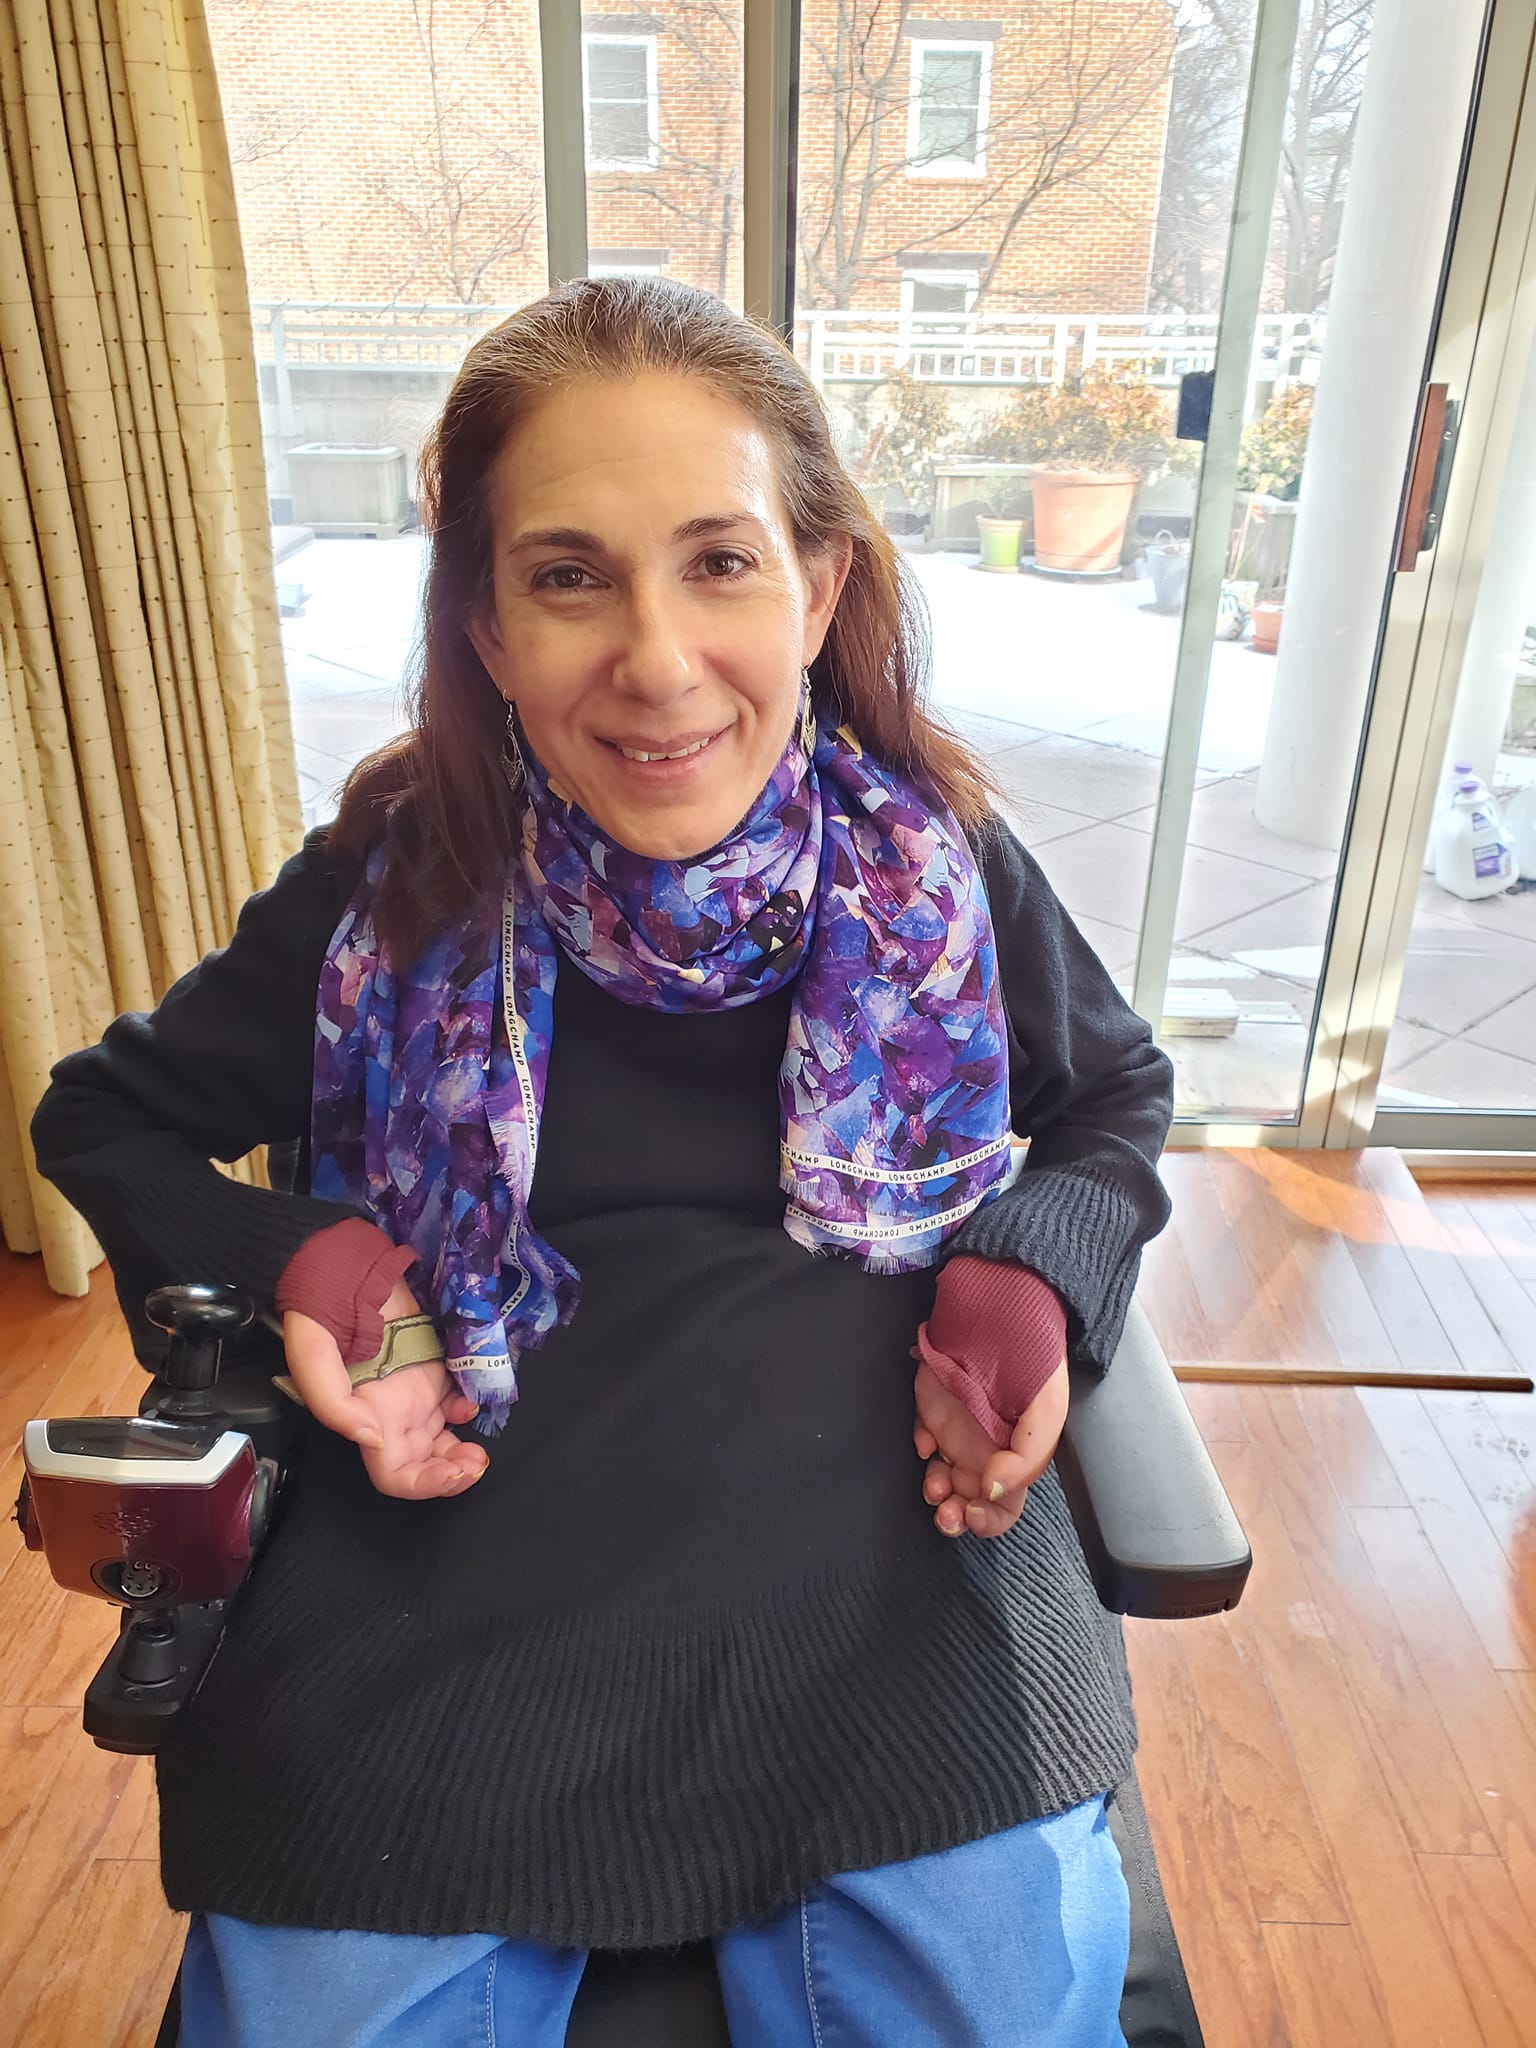 Sheri decided to start the week with some inspiration by wearing a beautiful scarf from her sister, 1-22.